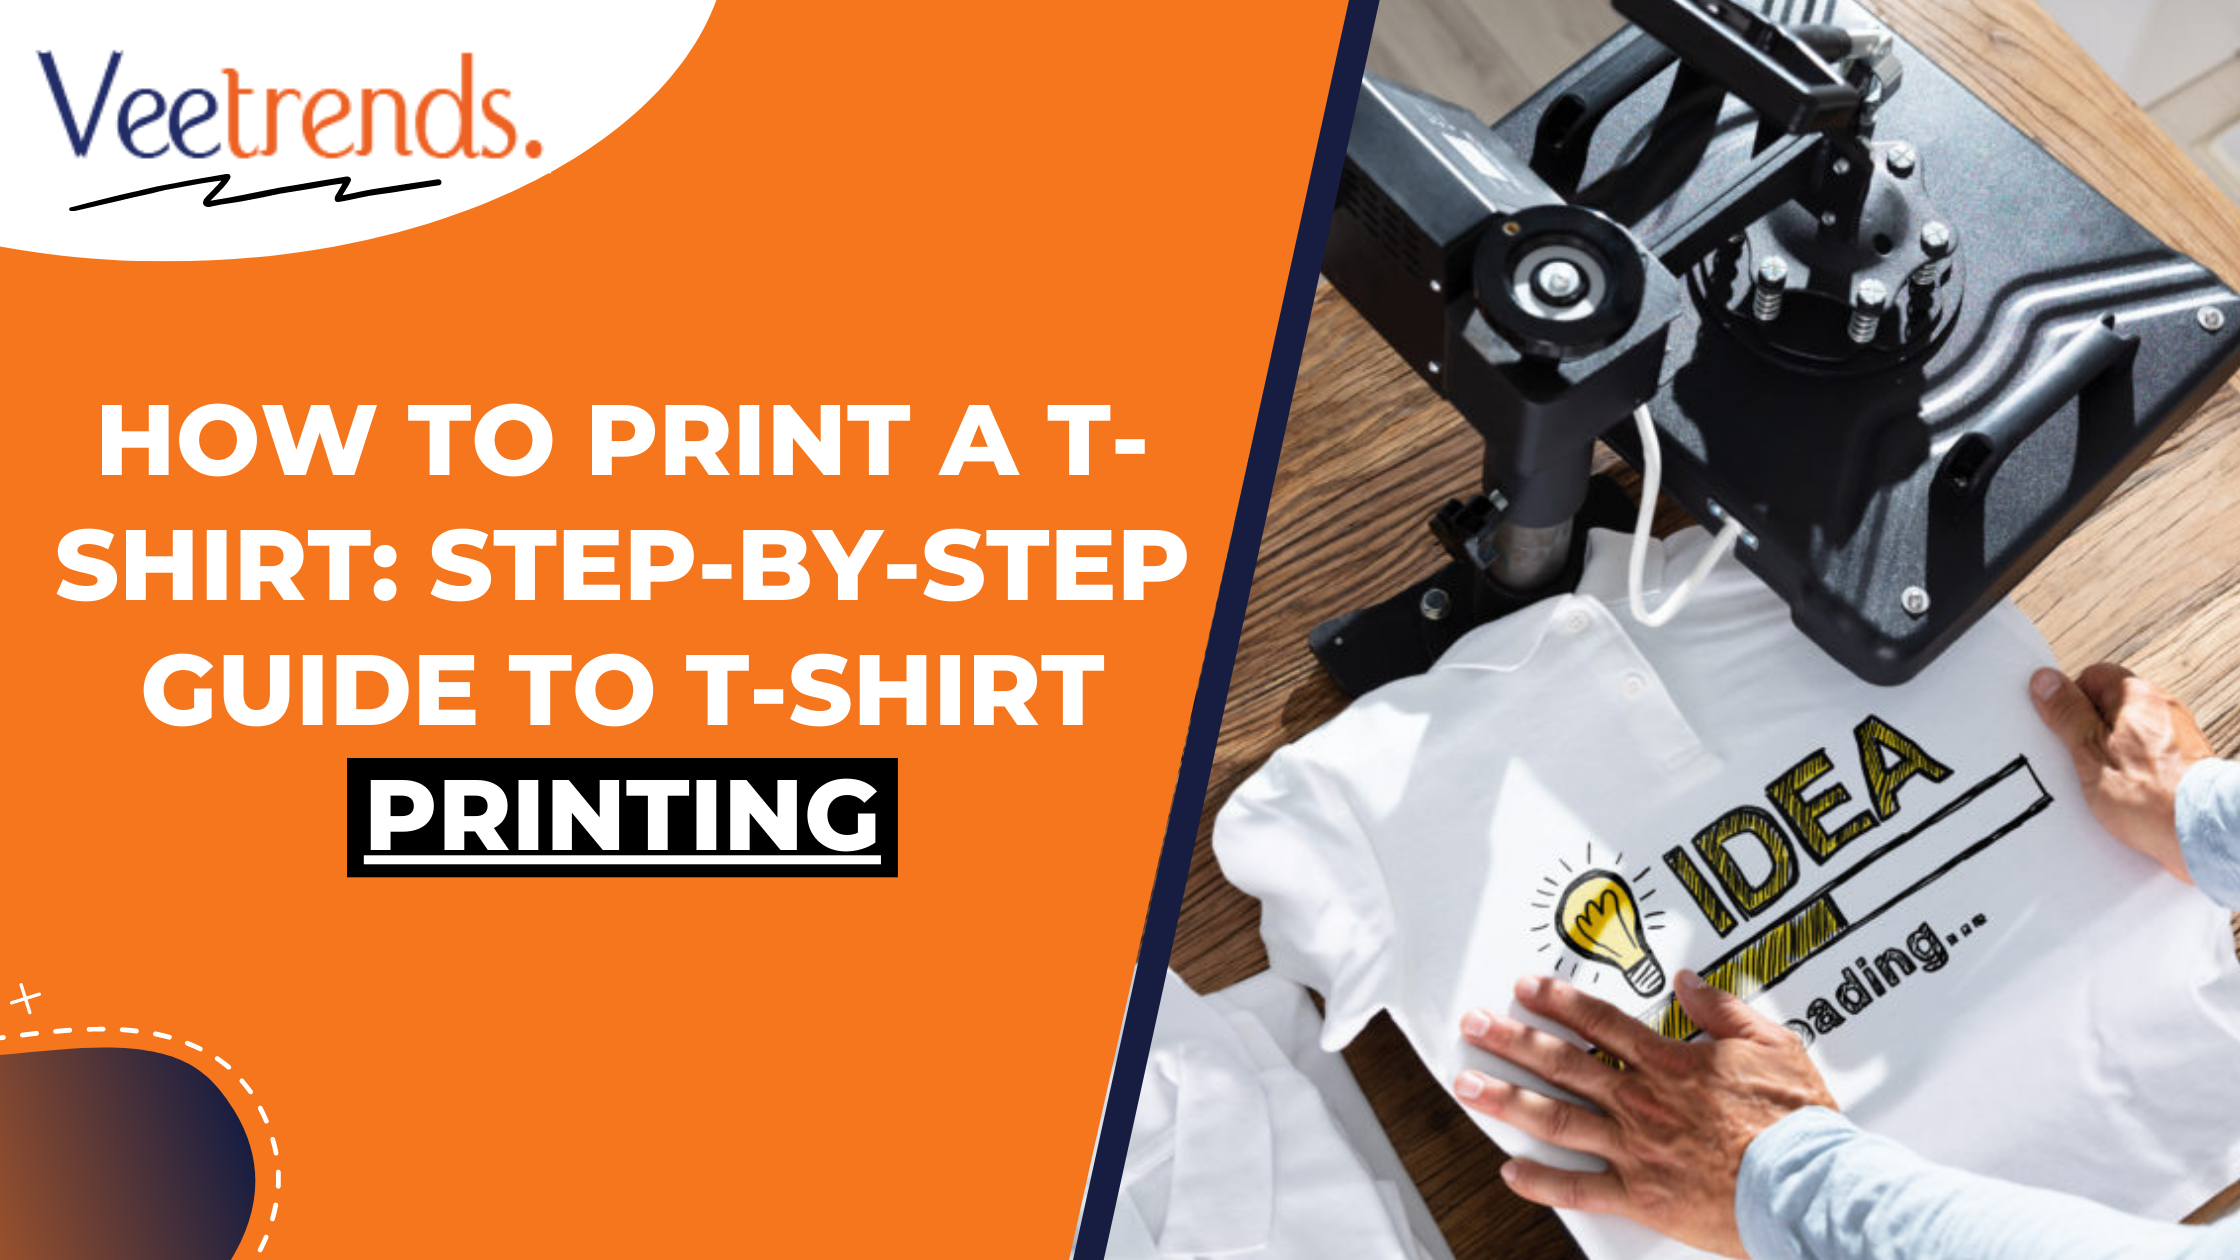 How to Print a T-Shirt: Step-By-Step Guide to T-Shirt Printing